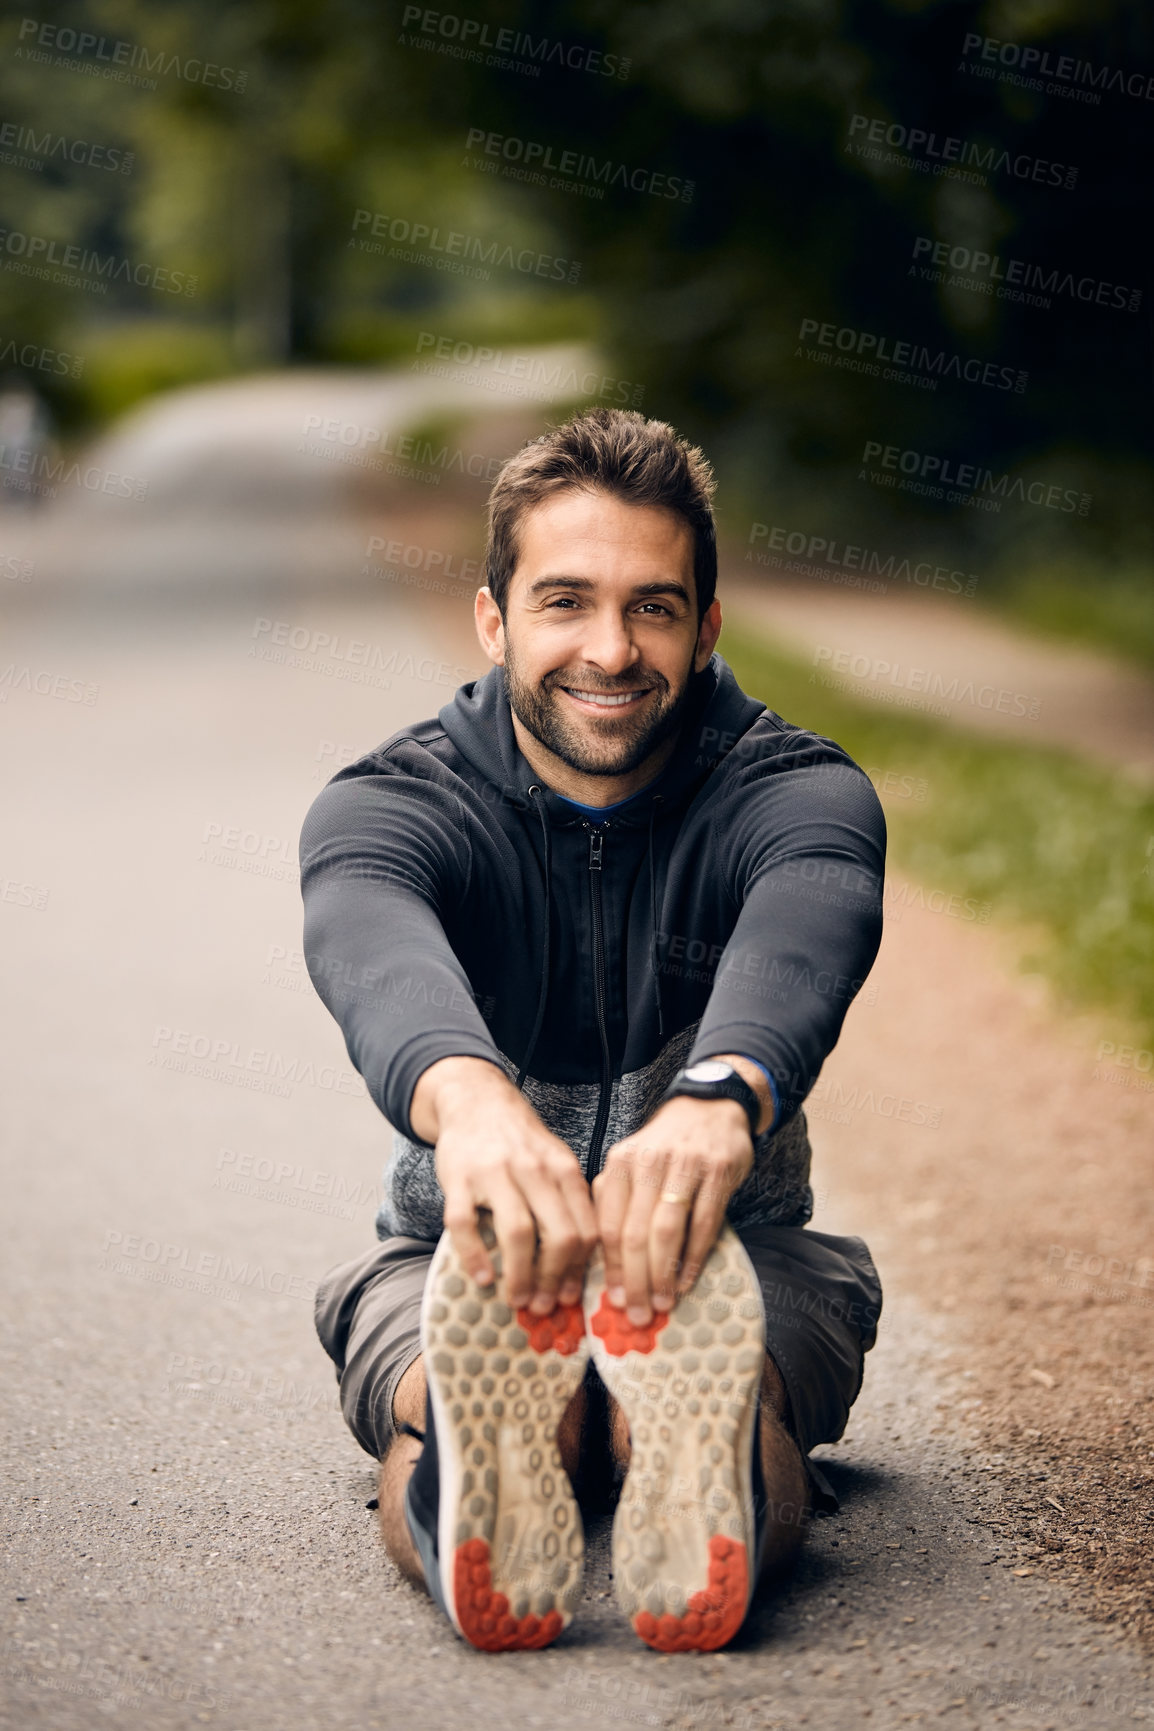 Buy stock photo Shot of a sporty man starting his exercise routine with stretching exercises